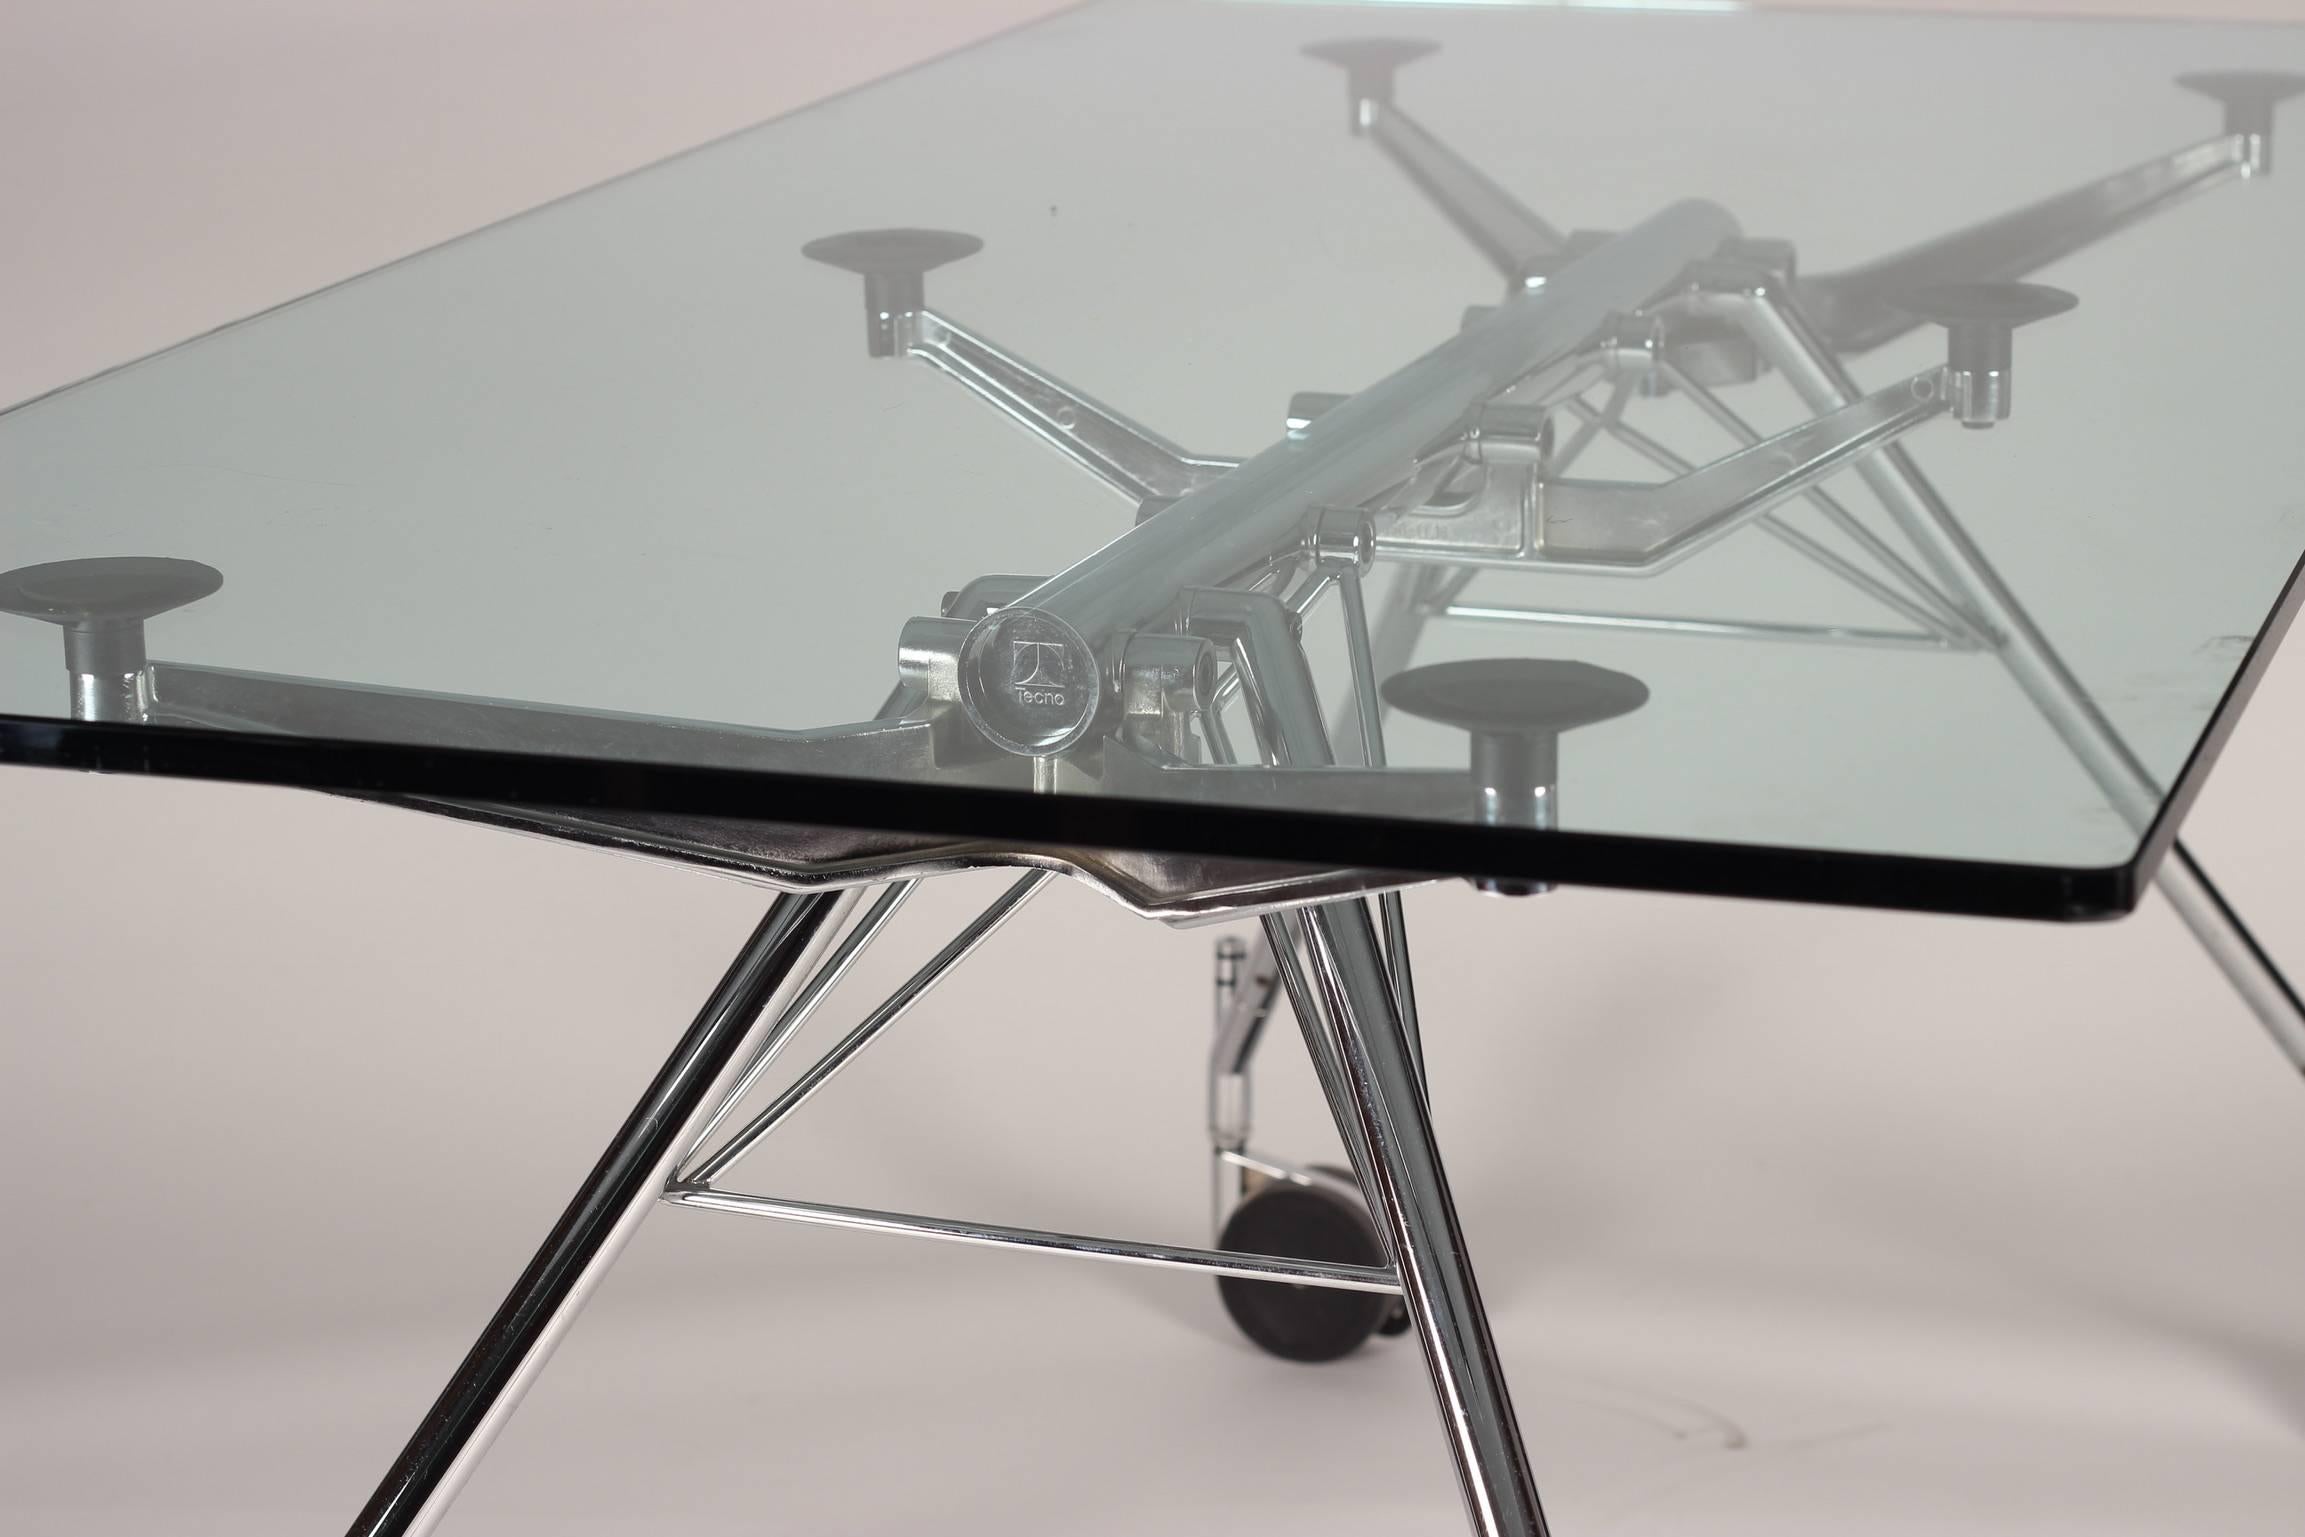 Designed by the World renowned Architect Sir Norman Foster The Nomos table, has been awarded numerous International Design prizes, including the Compasso d'Oro in 1987, it is one of Tecno's crowning glories amongst a history of successful pieces.